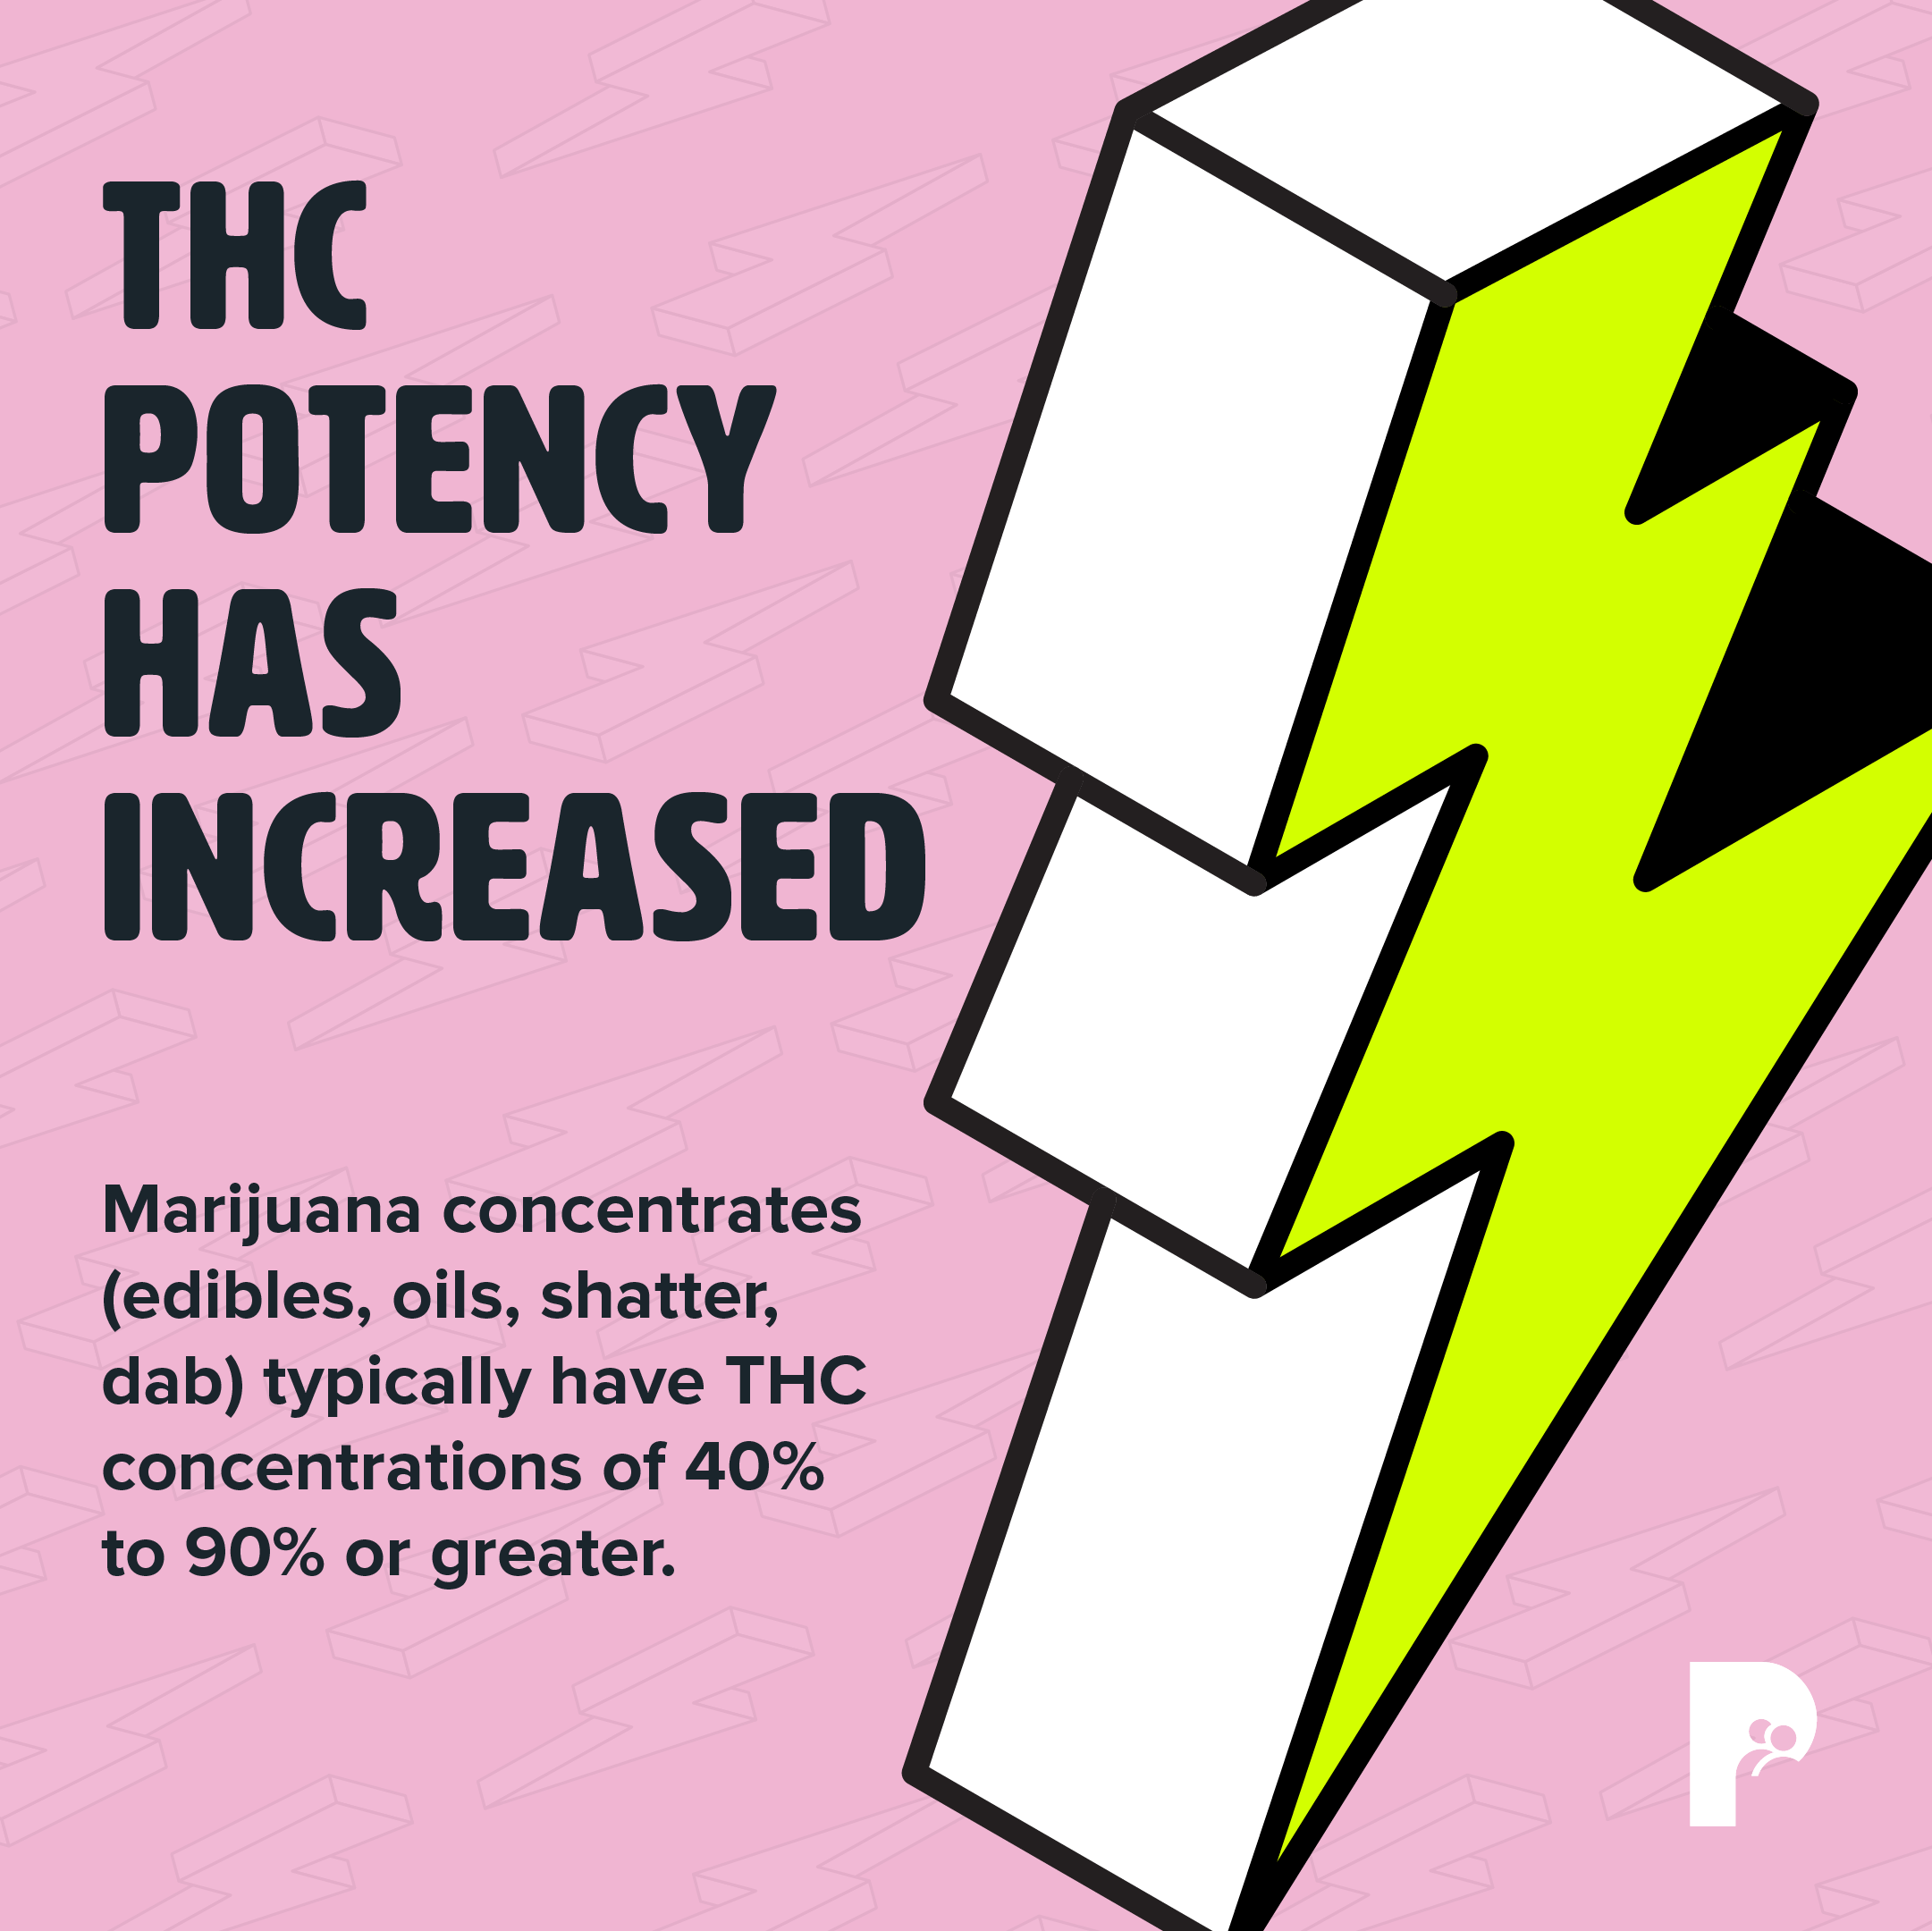 THC potency has increased. Marijuana concentrates typically have THC concentrations of 40% to 90% or greater.